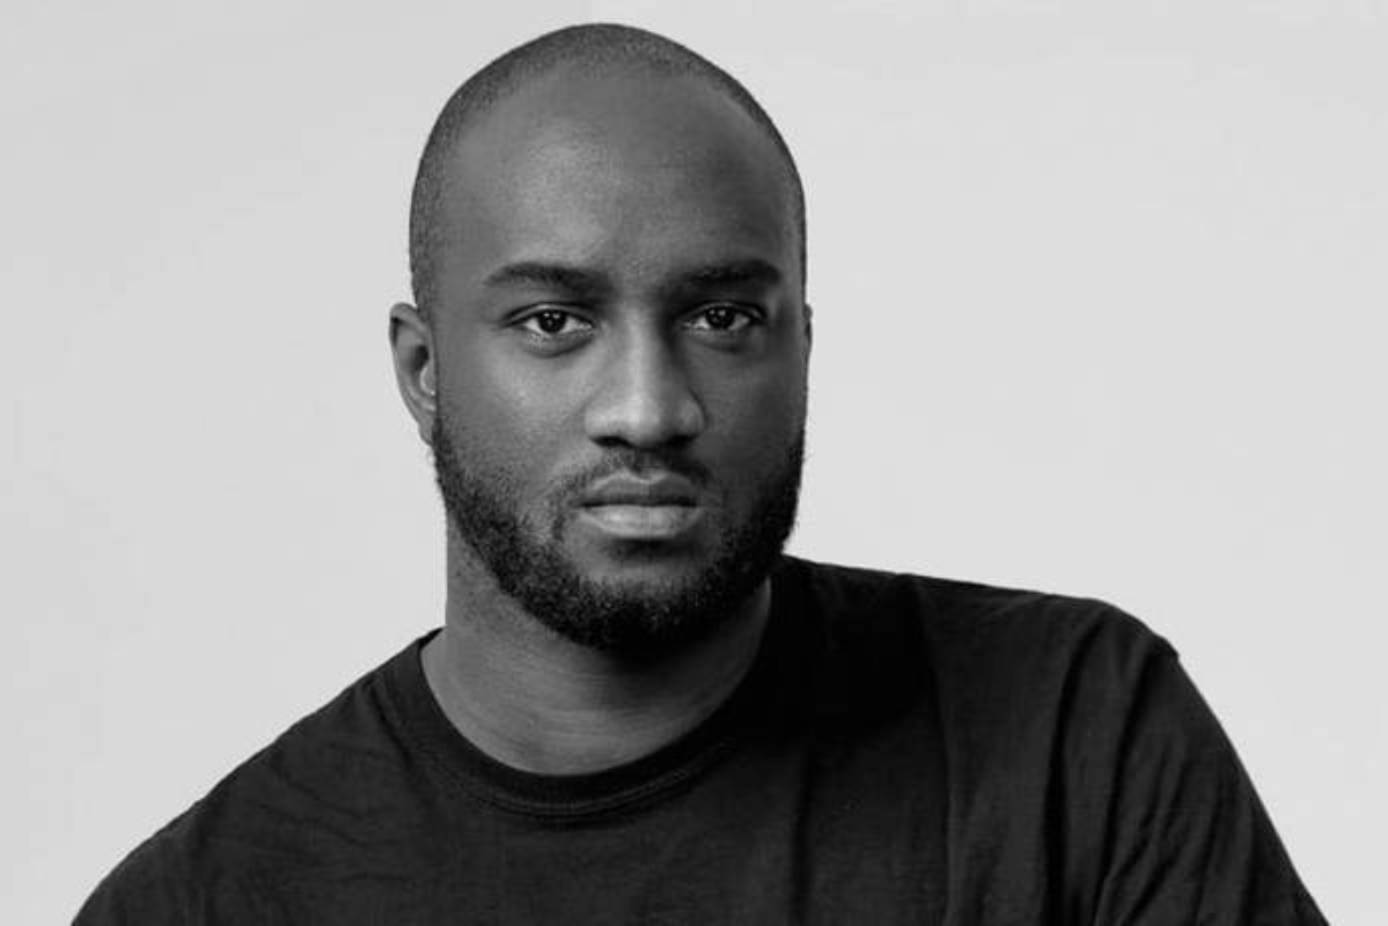 A Virgil Abloh exhibition is opening at the Brooklyn Museum this